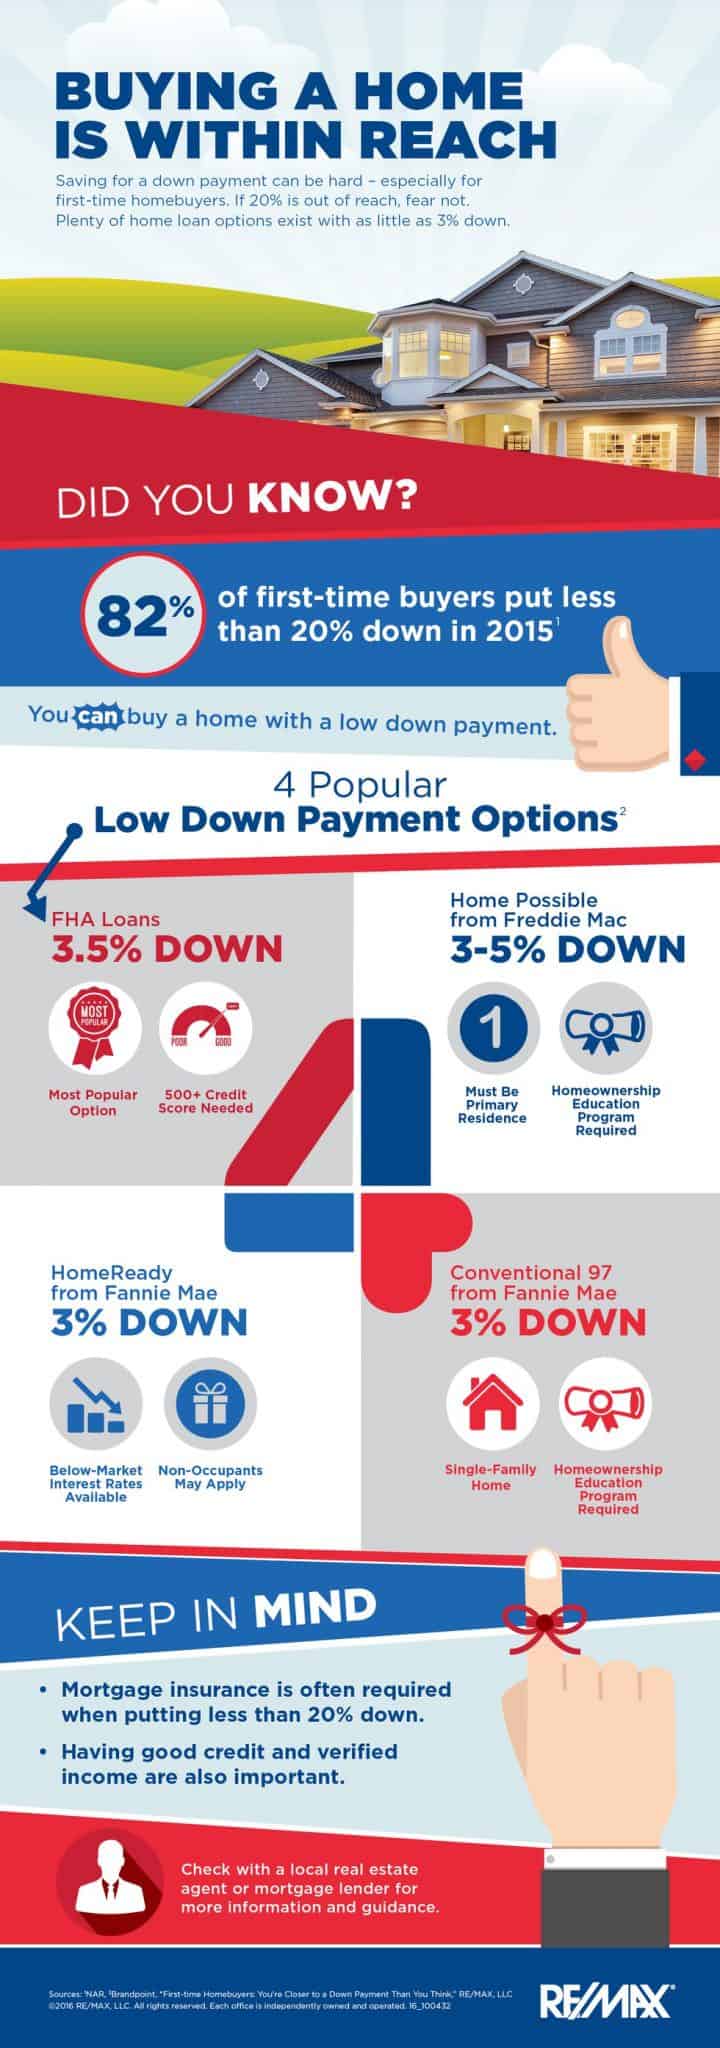 First-time buyers: You're closer to a down payment than you think